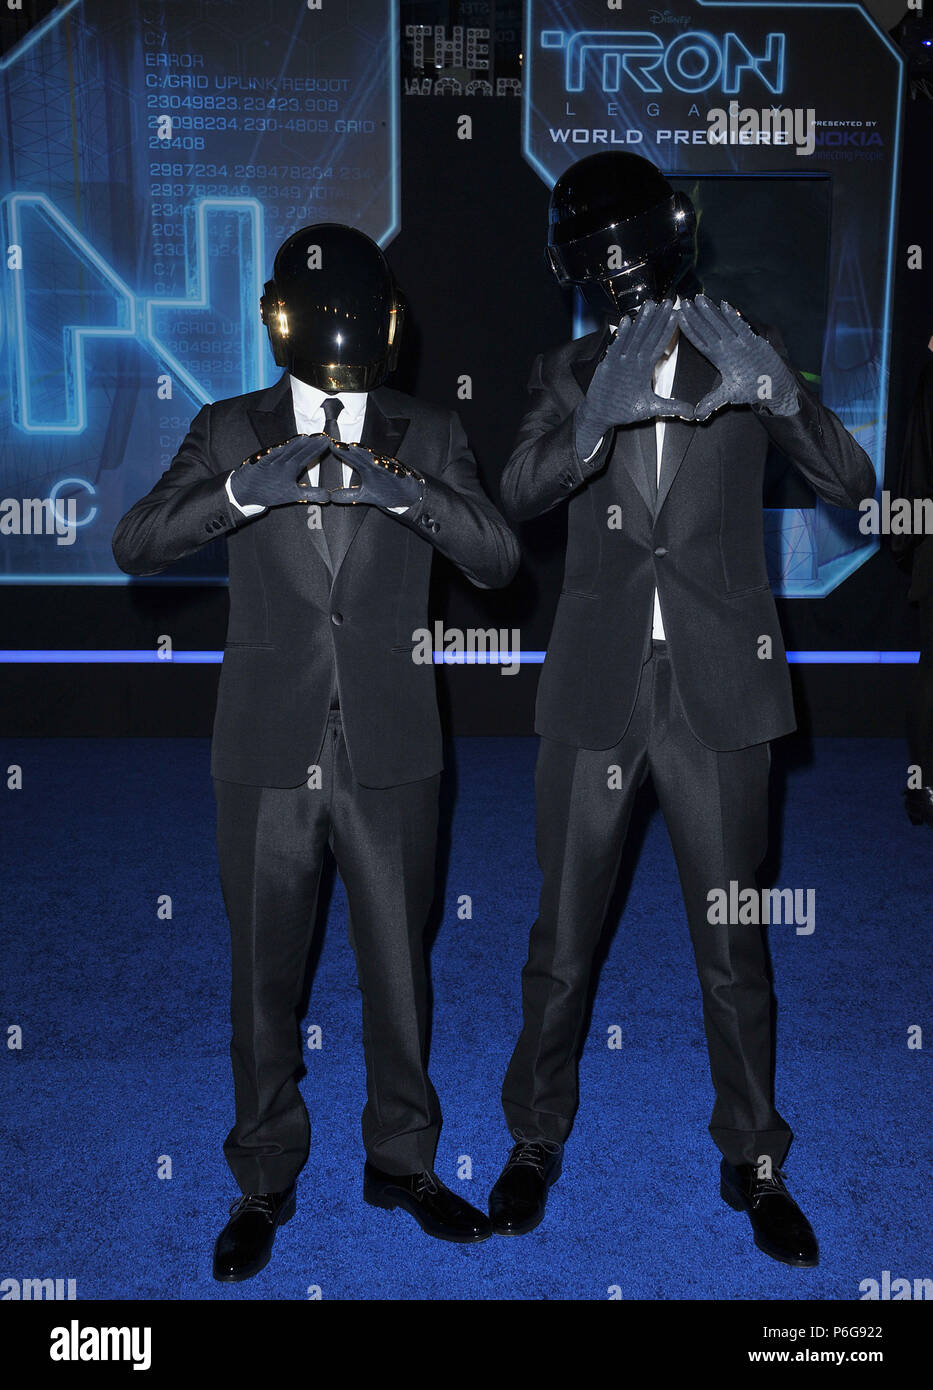 Daft Punk  - Tron: Legacy Premiere at the El Capitan Theatre In Los Angeles.Daft Punk 19  Event in Hollywood Life - California, Red Carpet Event, USA, Film Industry, Celebrities, Photography, Bestof, Arts Culture and Entertainment, Topix Celebrities fashion, Best of, Hollywood Life, Event in Hollywood Life - California, Red Carpet and backstage, ,Arts Culture and Entertainment, Photography,    inquiry tsuni@Gamma-USA.com ,  Music celebrities, Musician, Music Group, 2010 Stock Photo